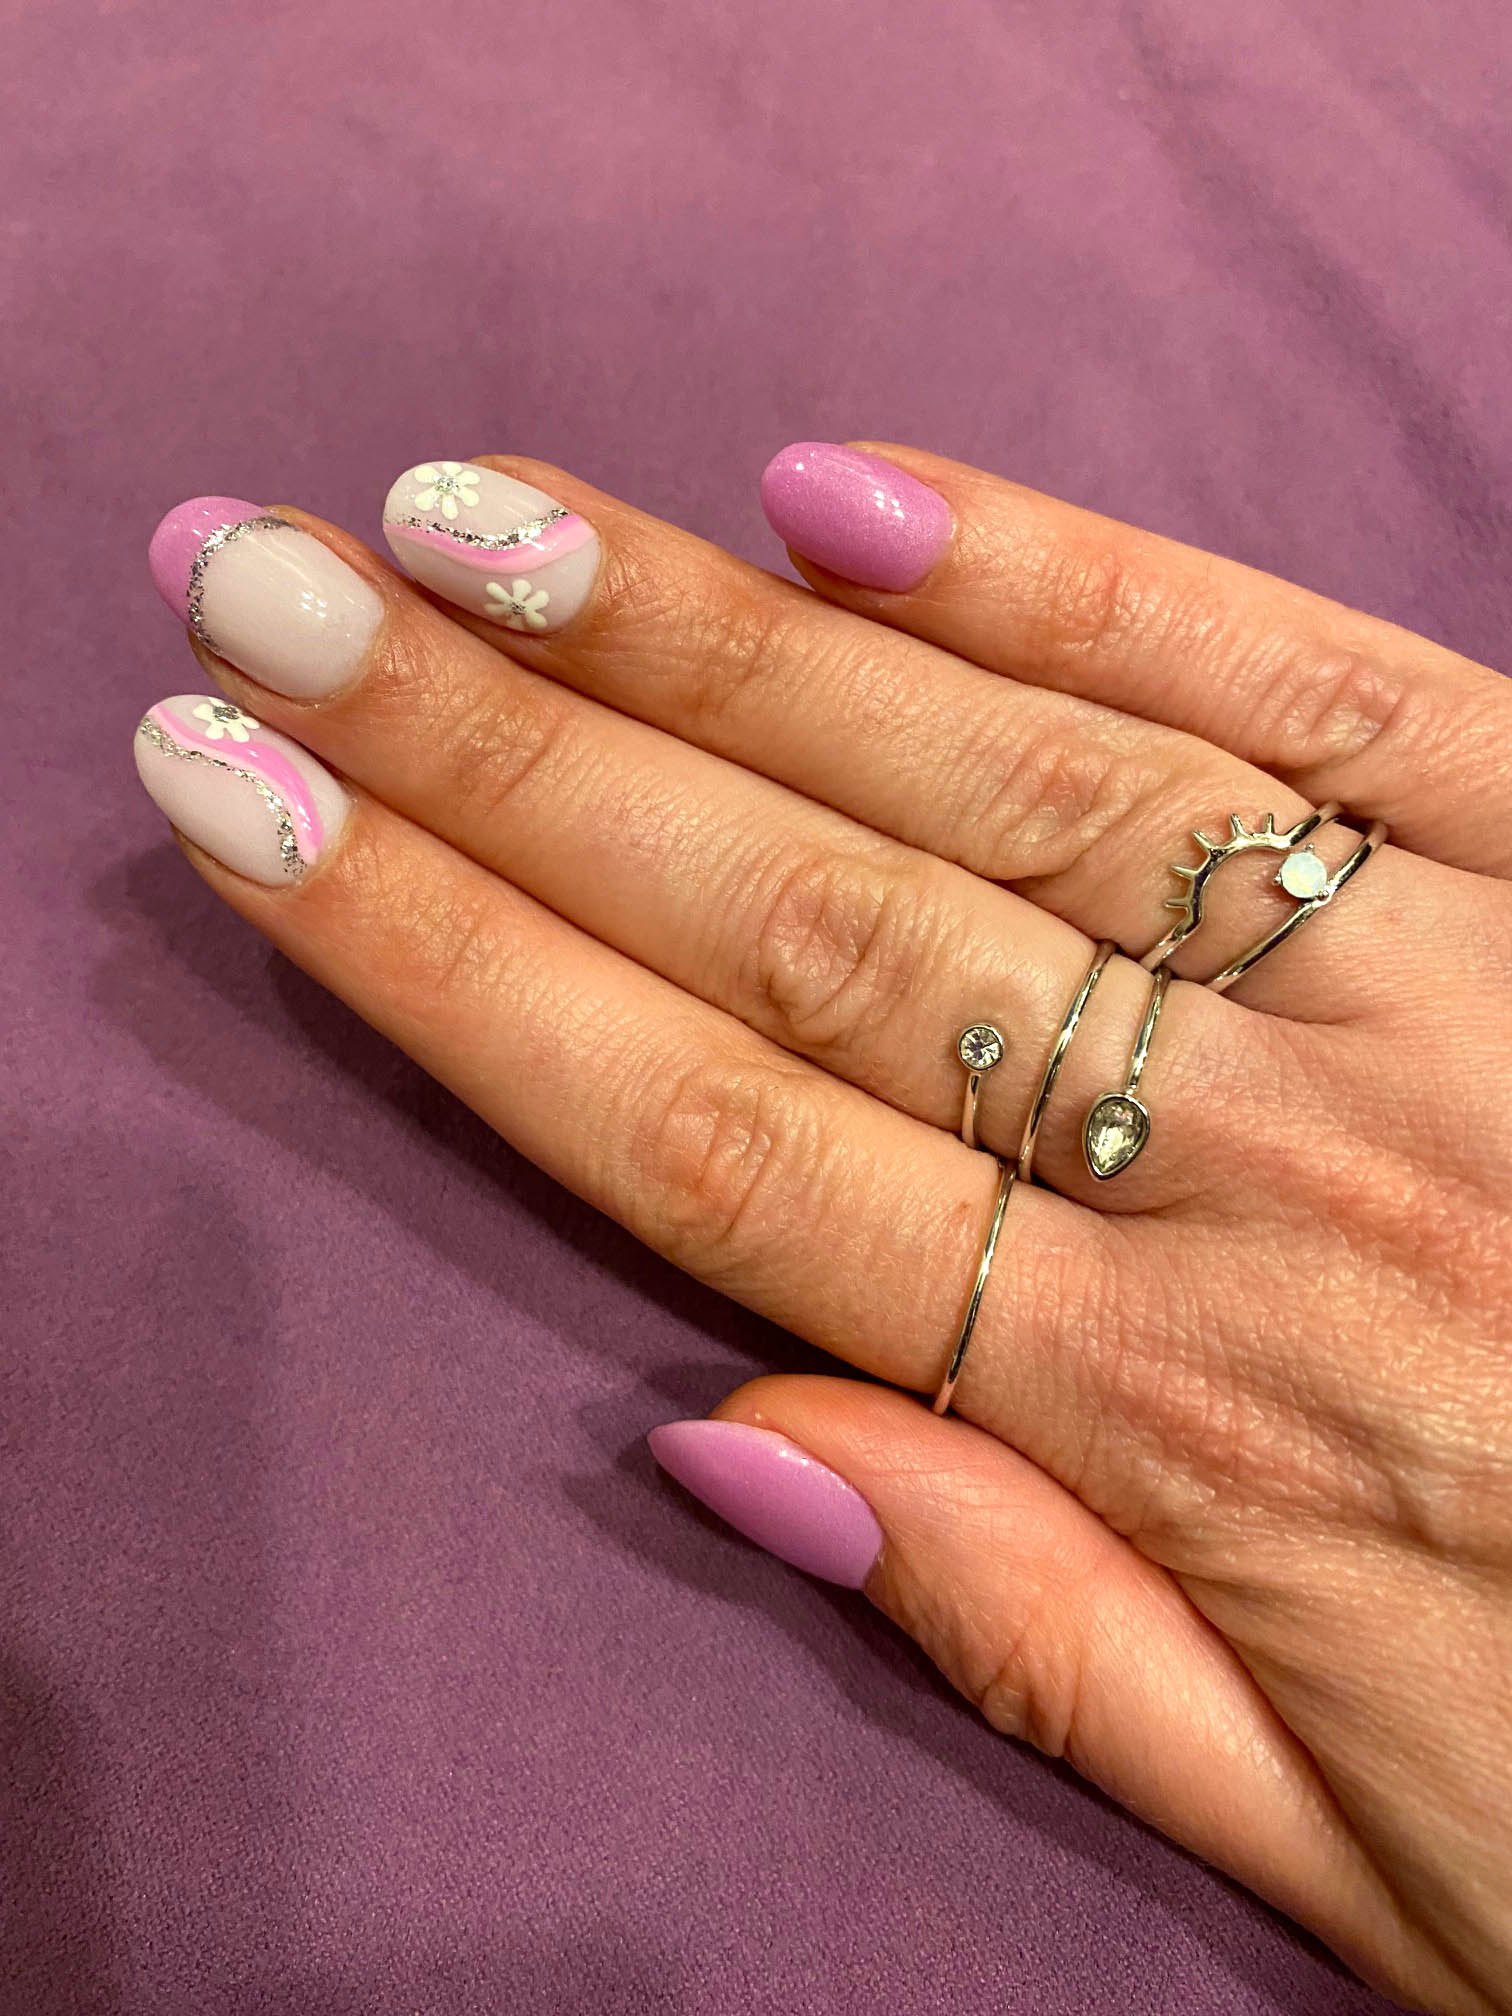  Purple French Tips With Flowers And Glitter Nail Design Inspo